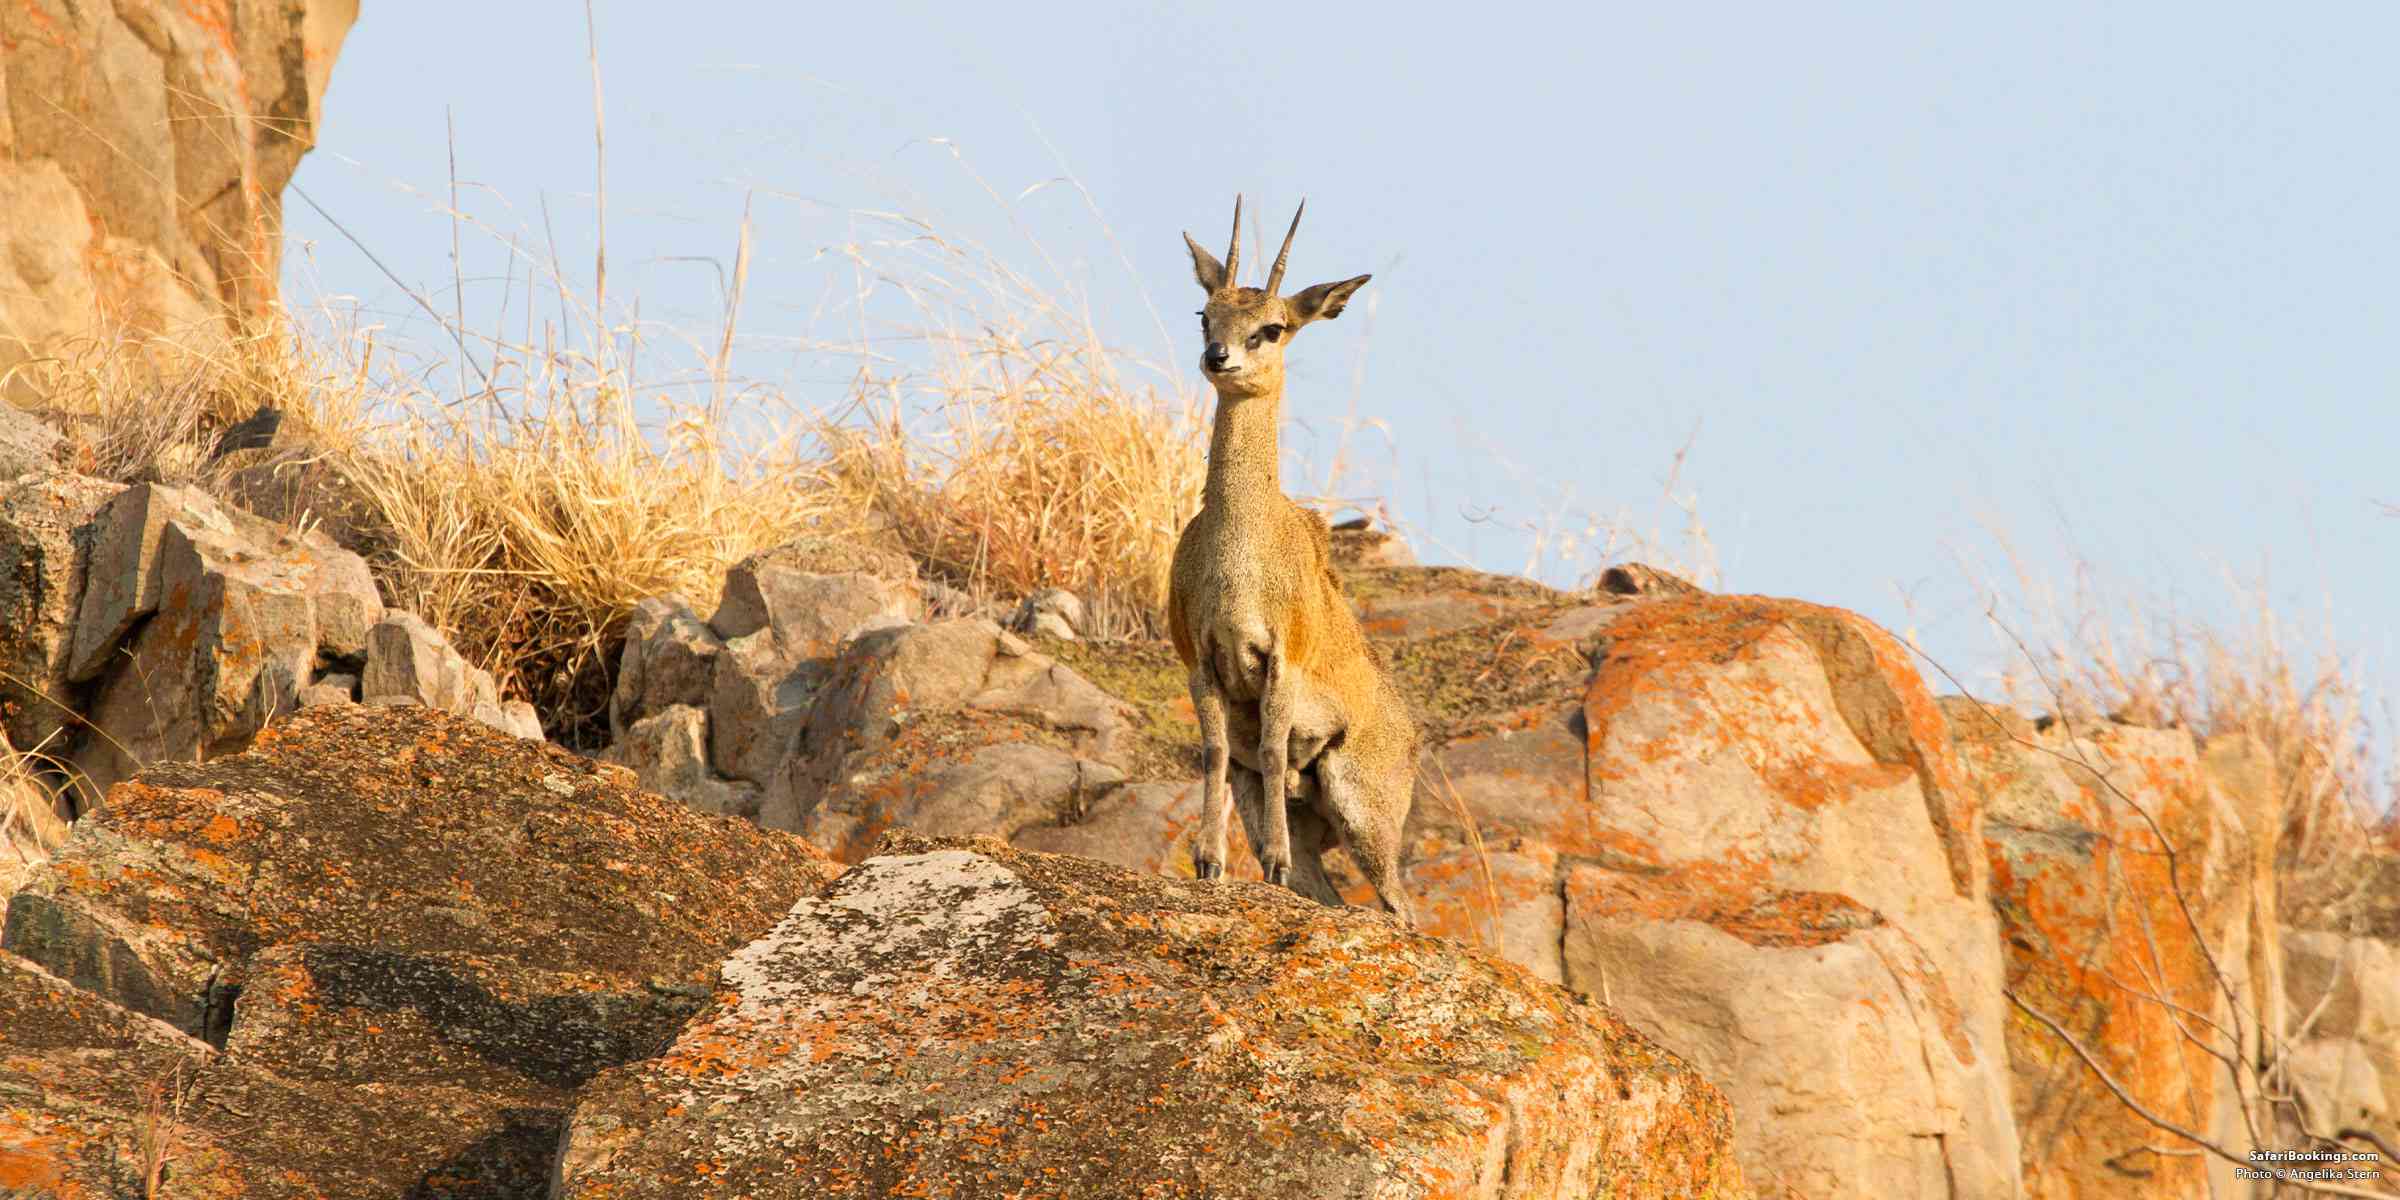 5 Fascinating Facts About the Klipspringer